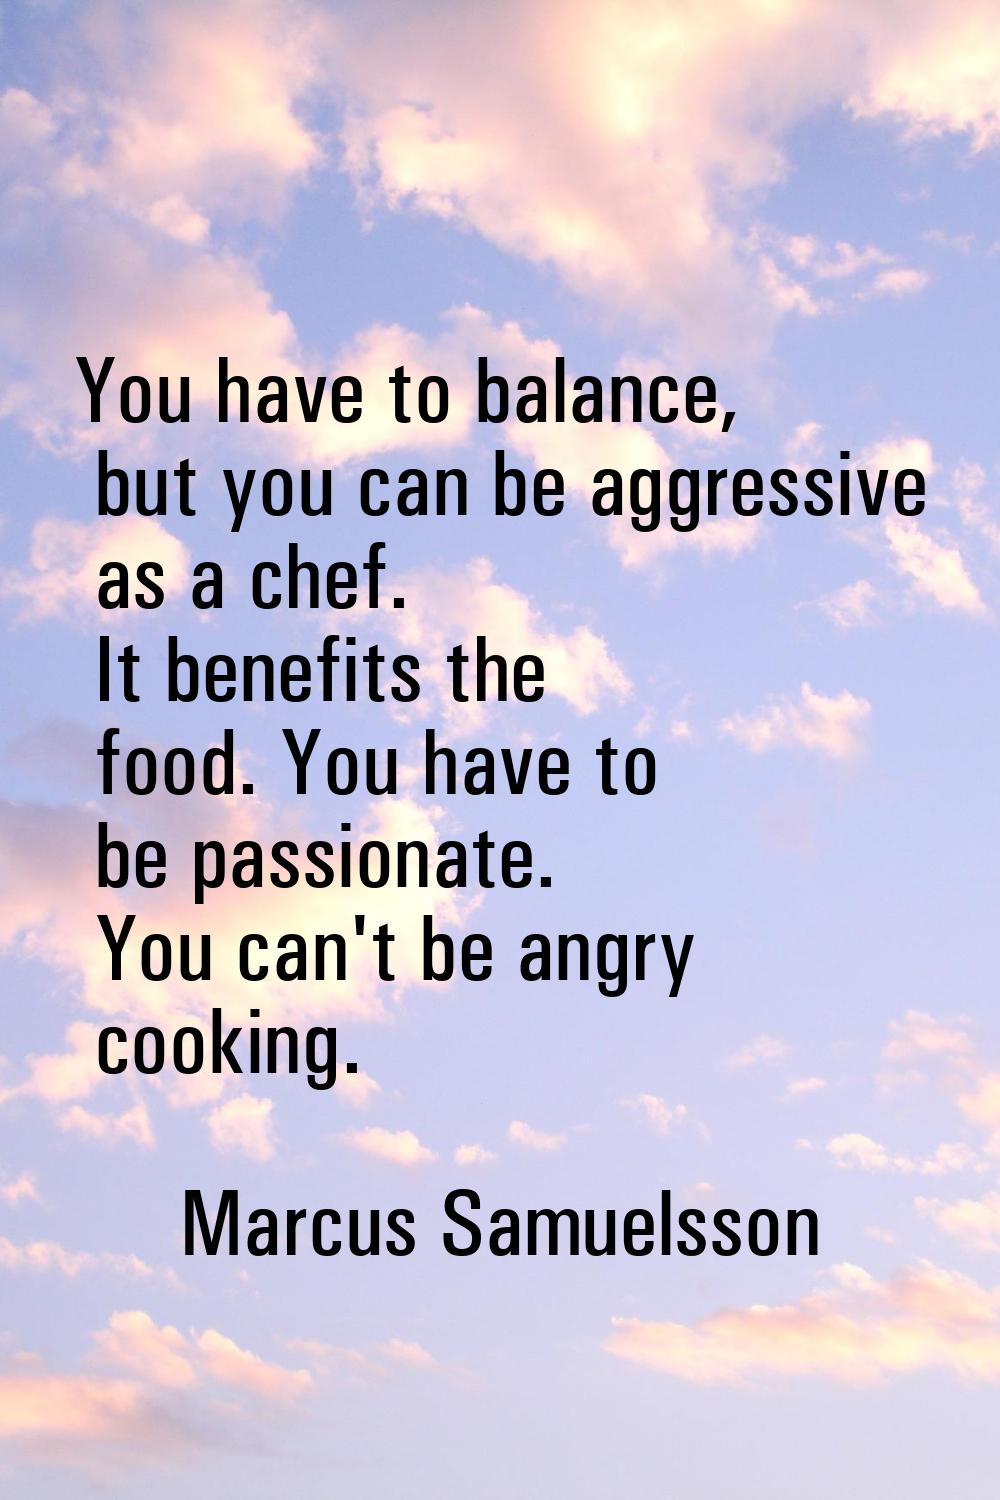 You have to balance, but you can be aggressive as a chef. It benefits the food. You have to be pass